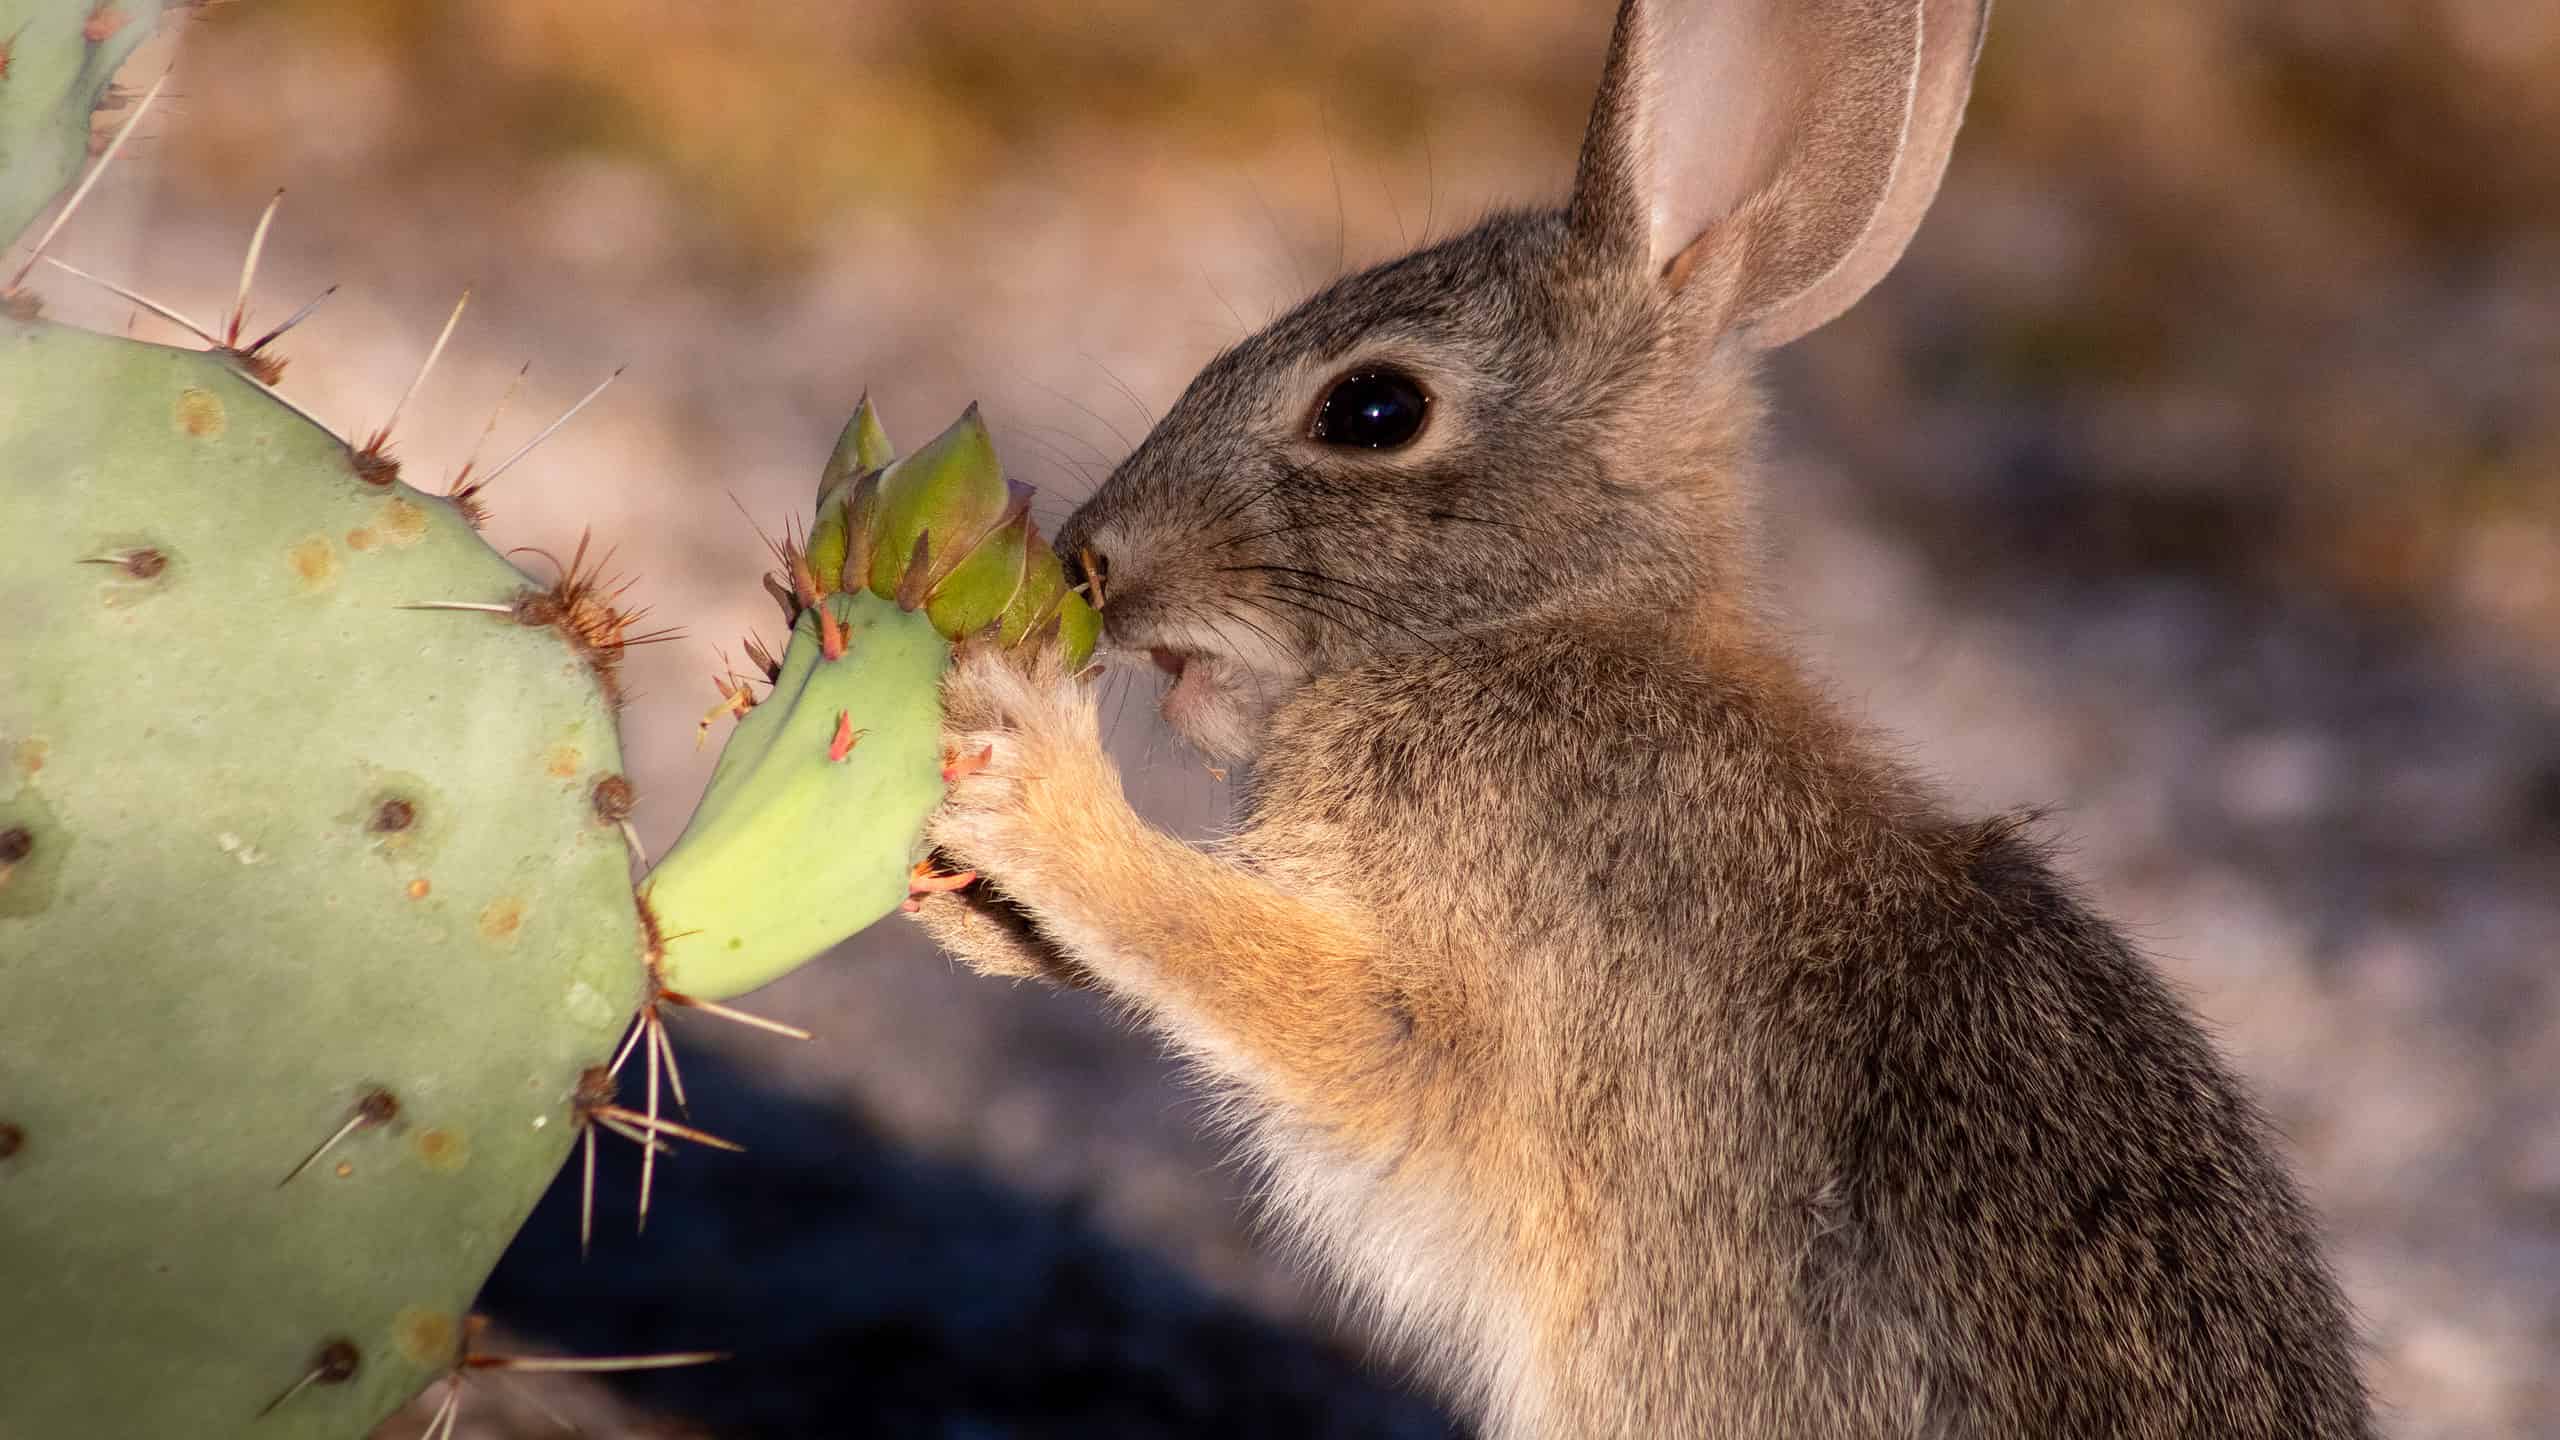 A young desert cottontail rabbit in the Sonoran Desert eating prickly pear cactus flower blossoms in early morning light. Cute bunny close up in natural habitat. Pima County, Tucson, Arizona, USA.